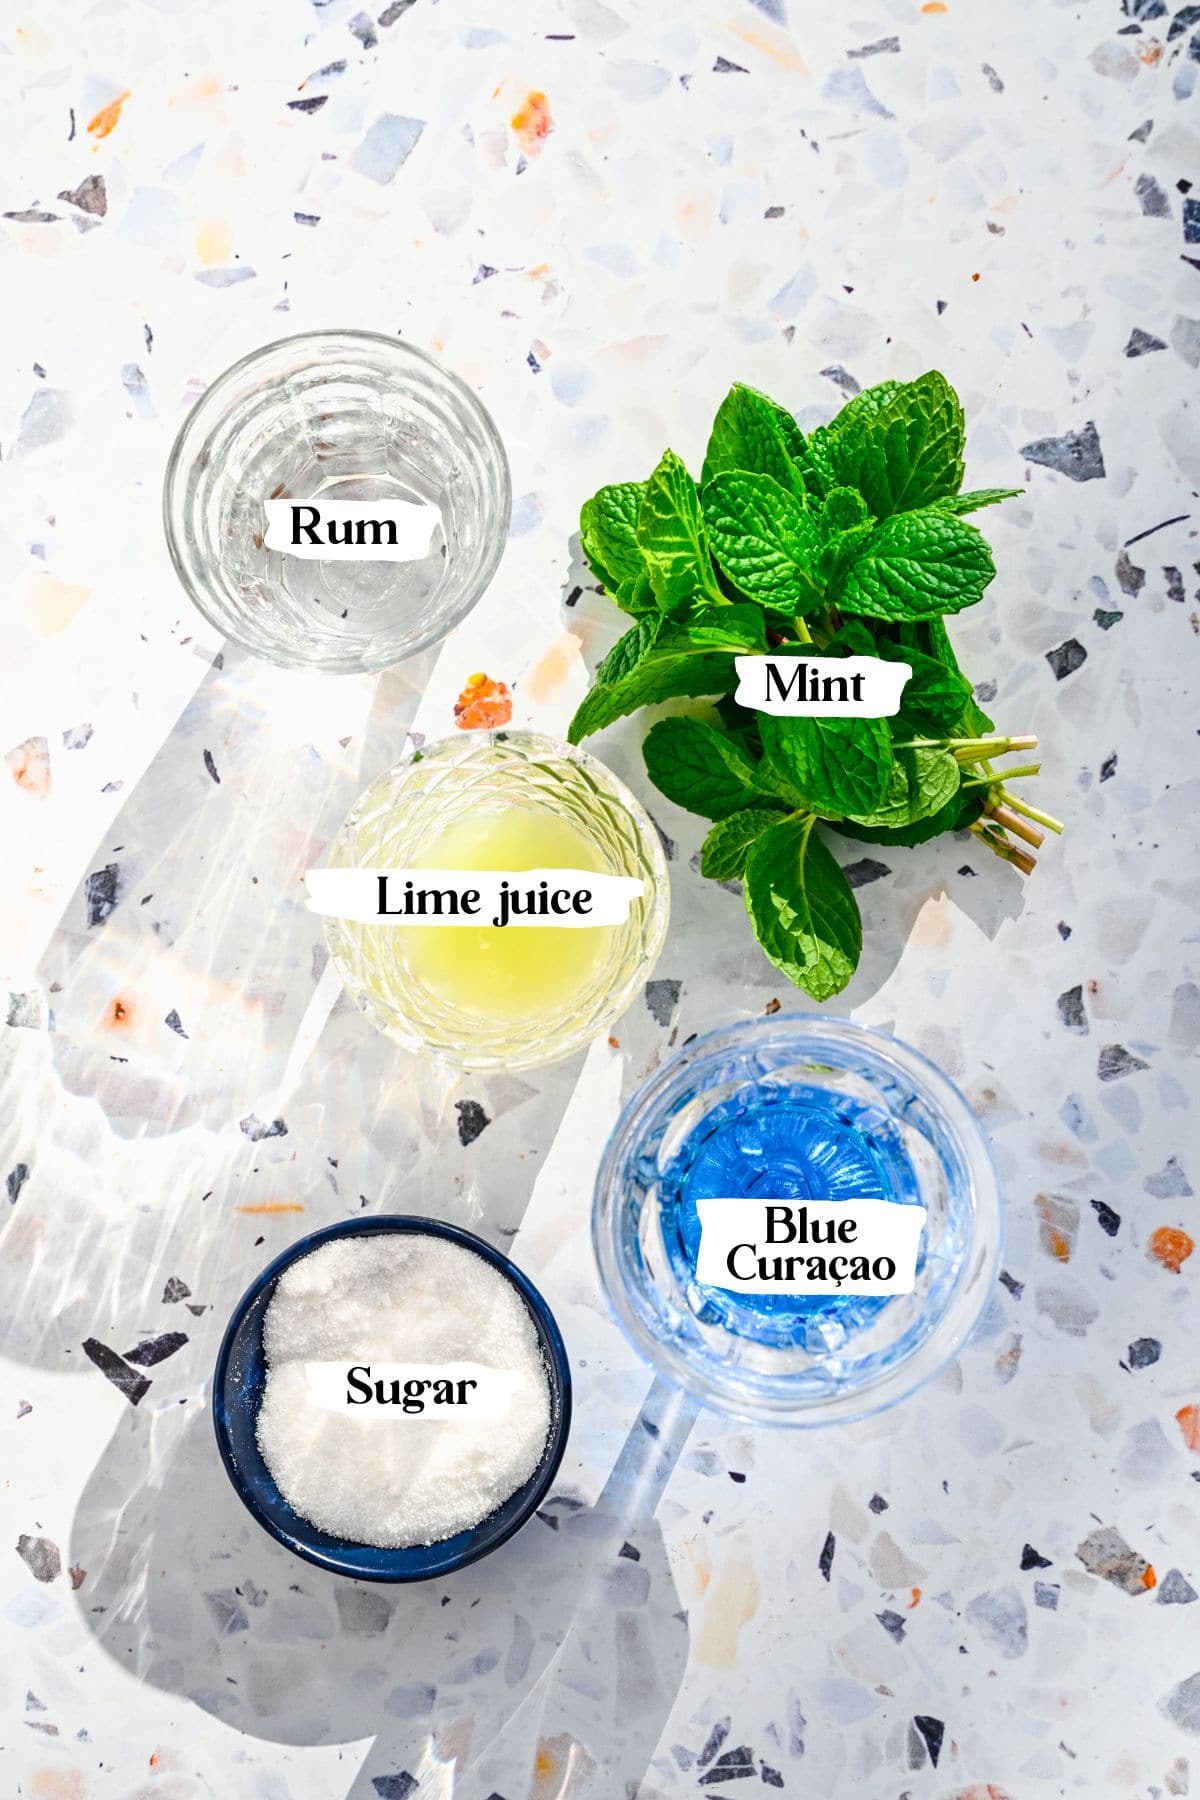 Blue mojito ingredients including mint and rum.